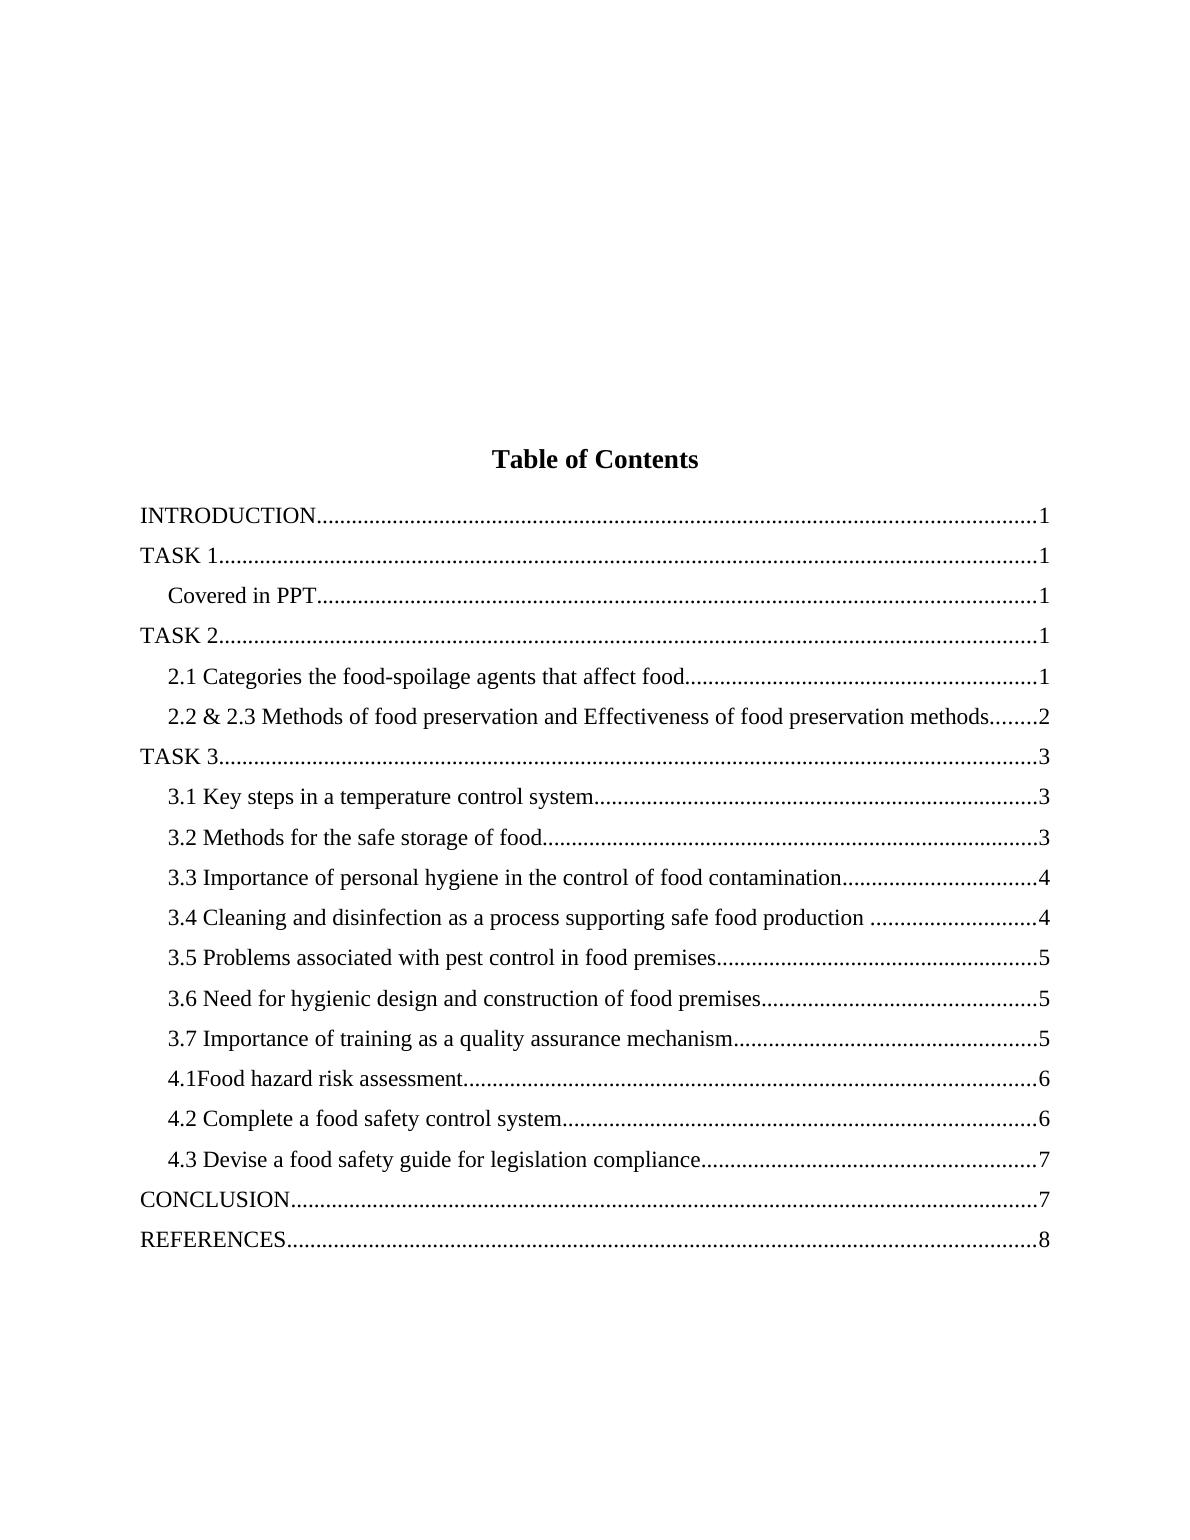 Food Safety Management Assignment Copy (Doc)_2